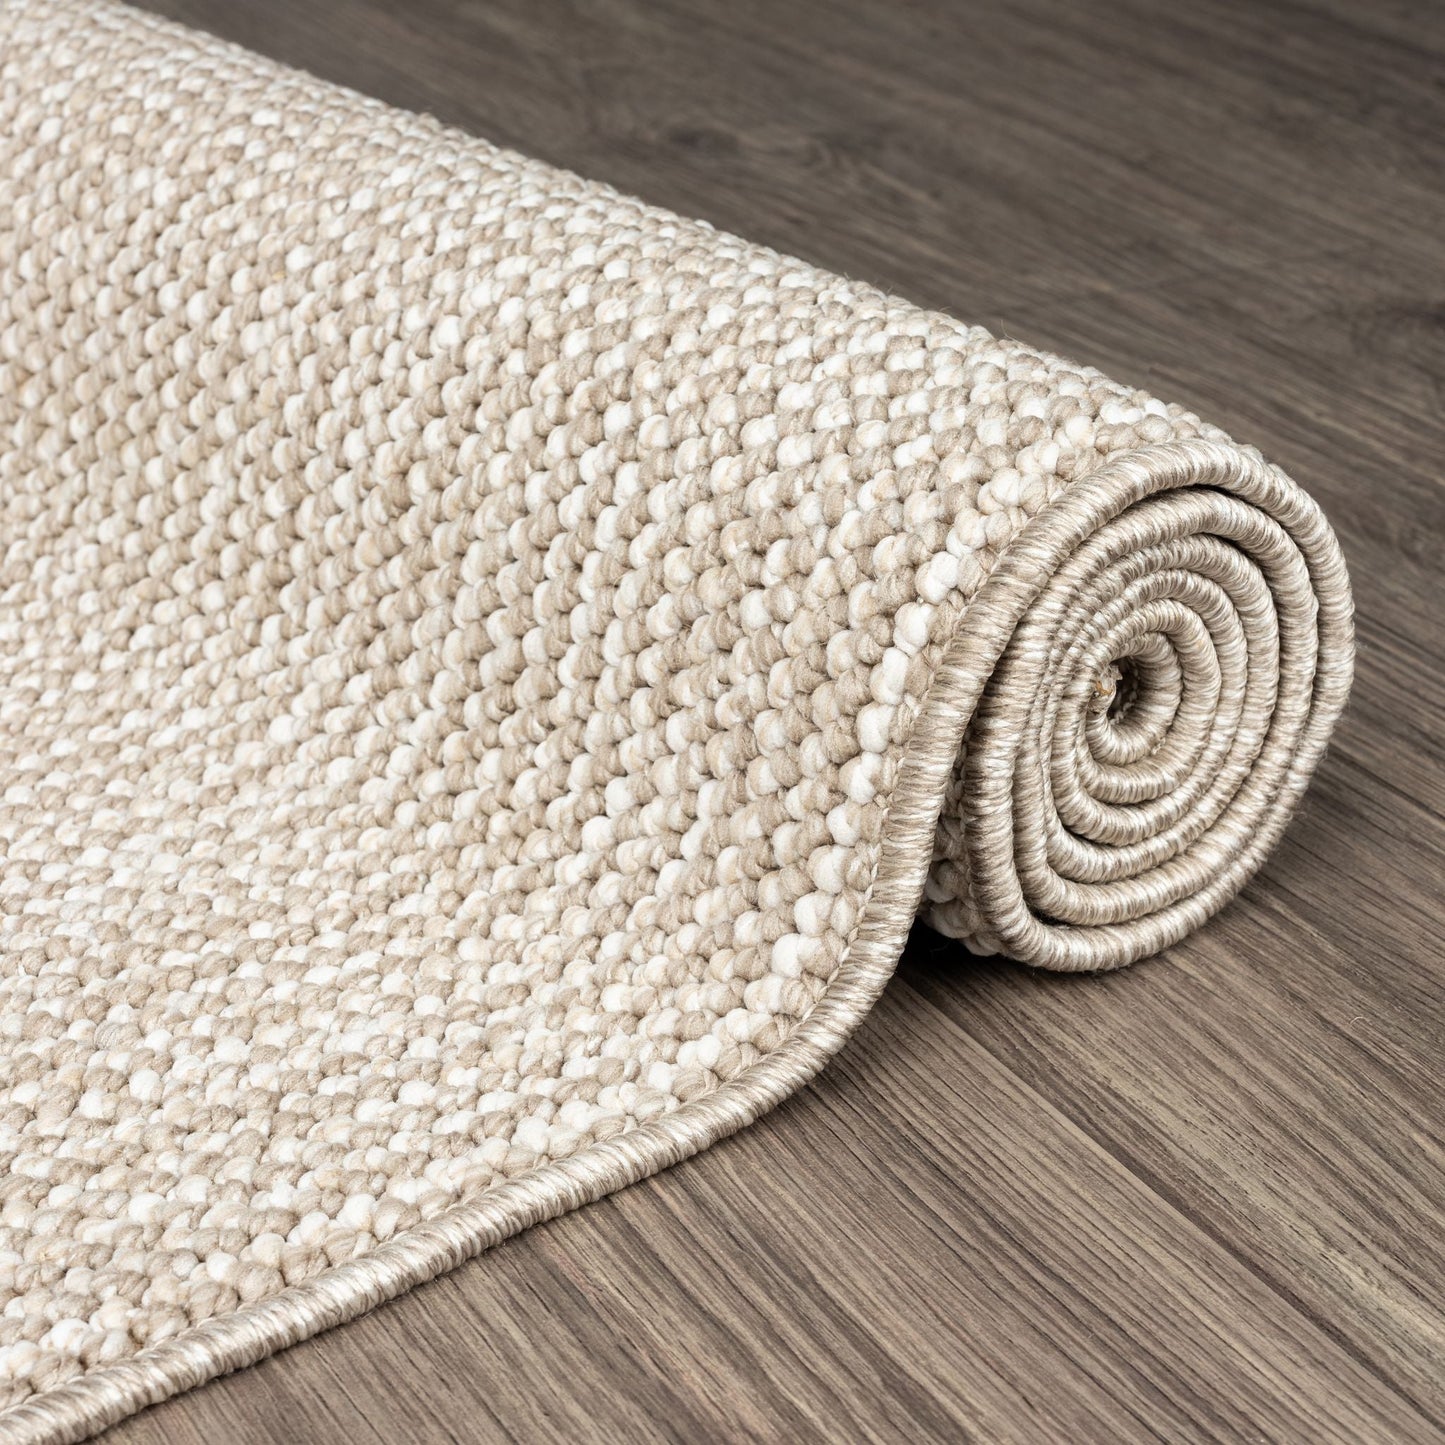 Solace 194 Taupe Saray Rugs